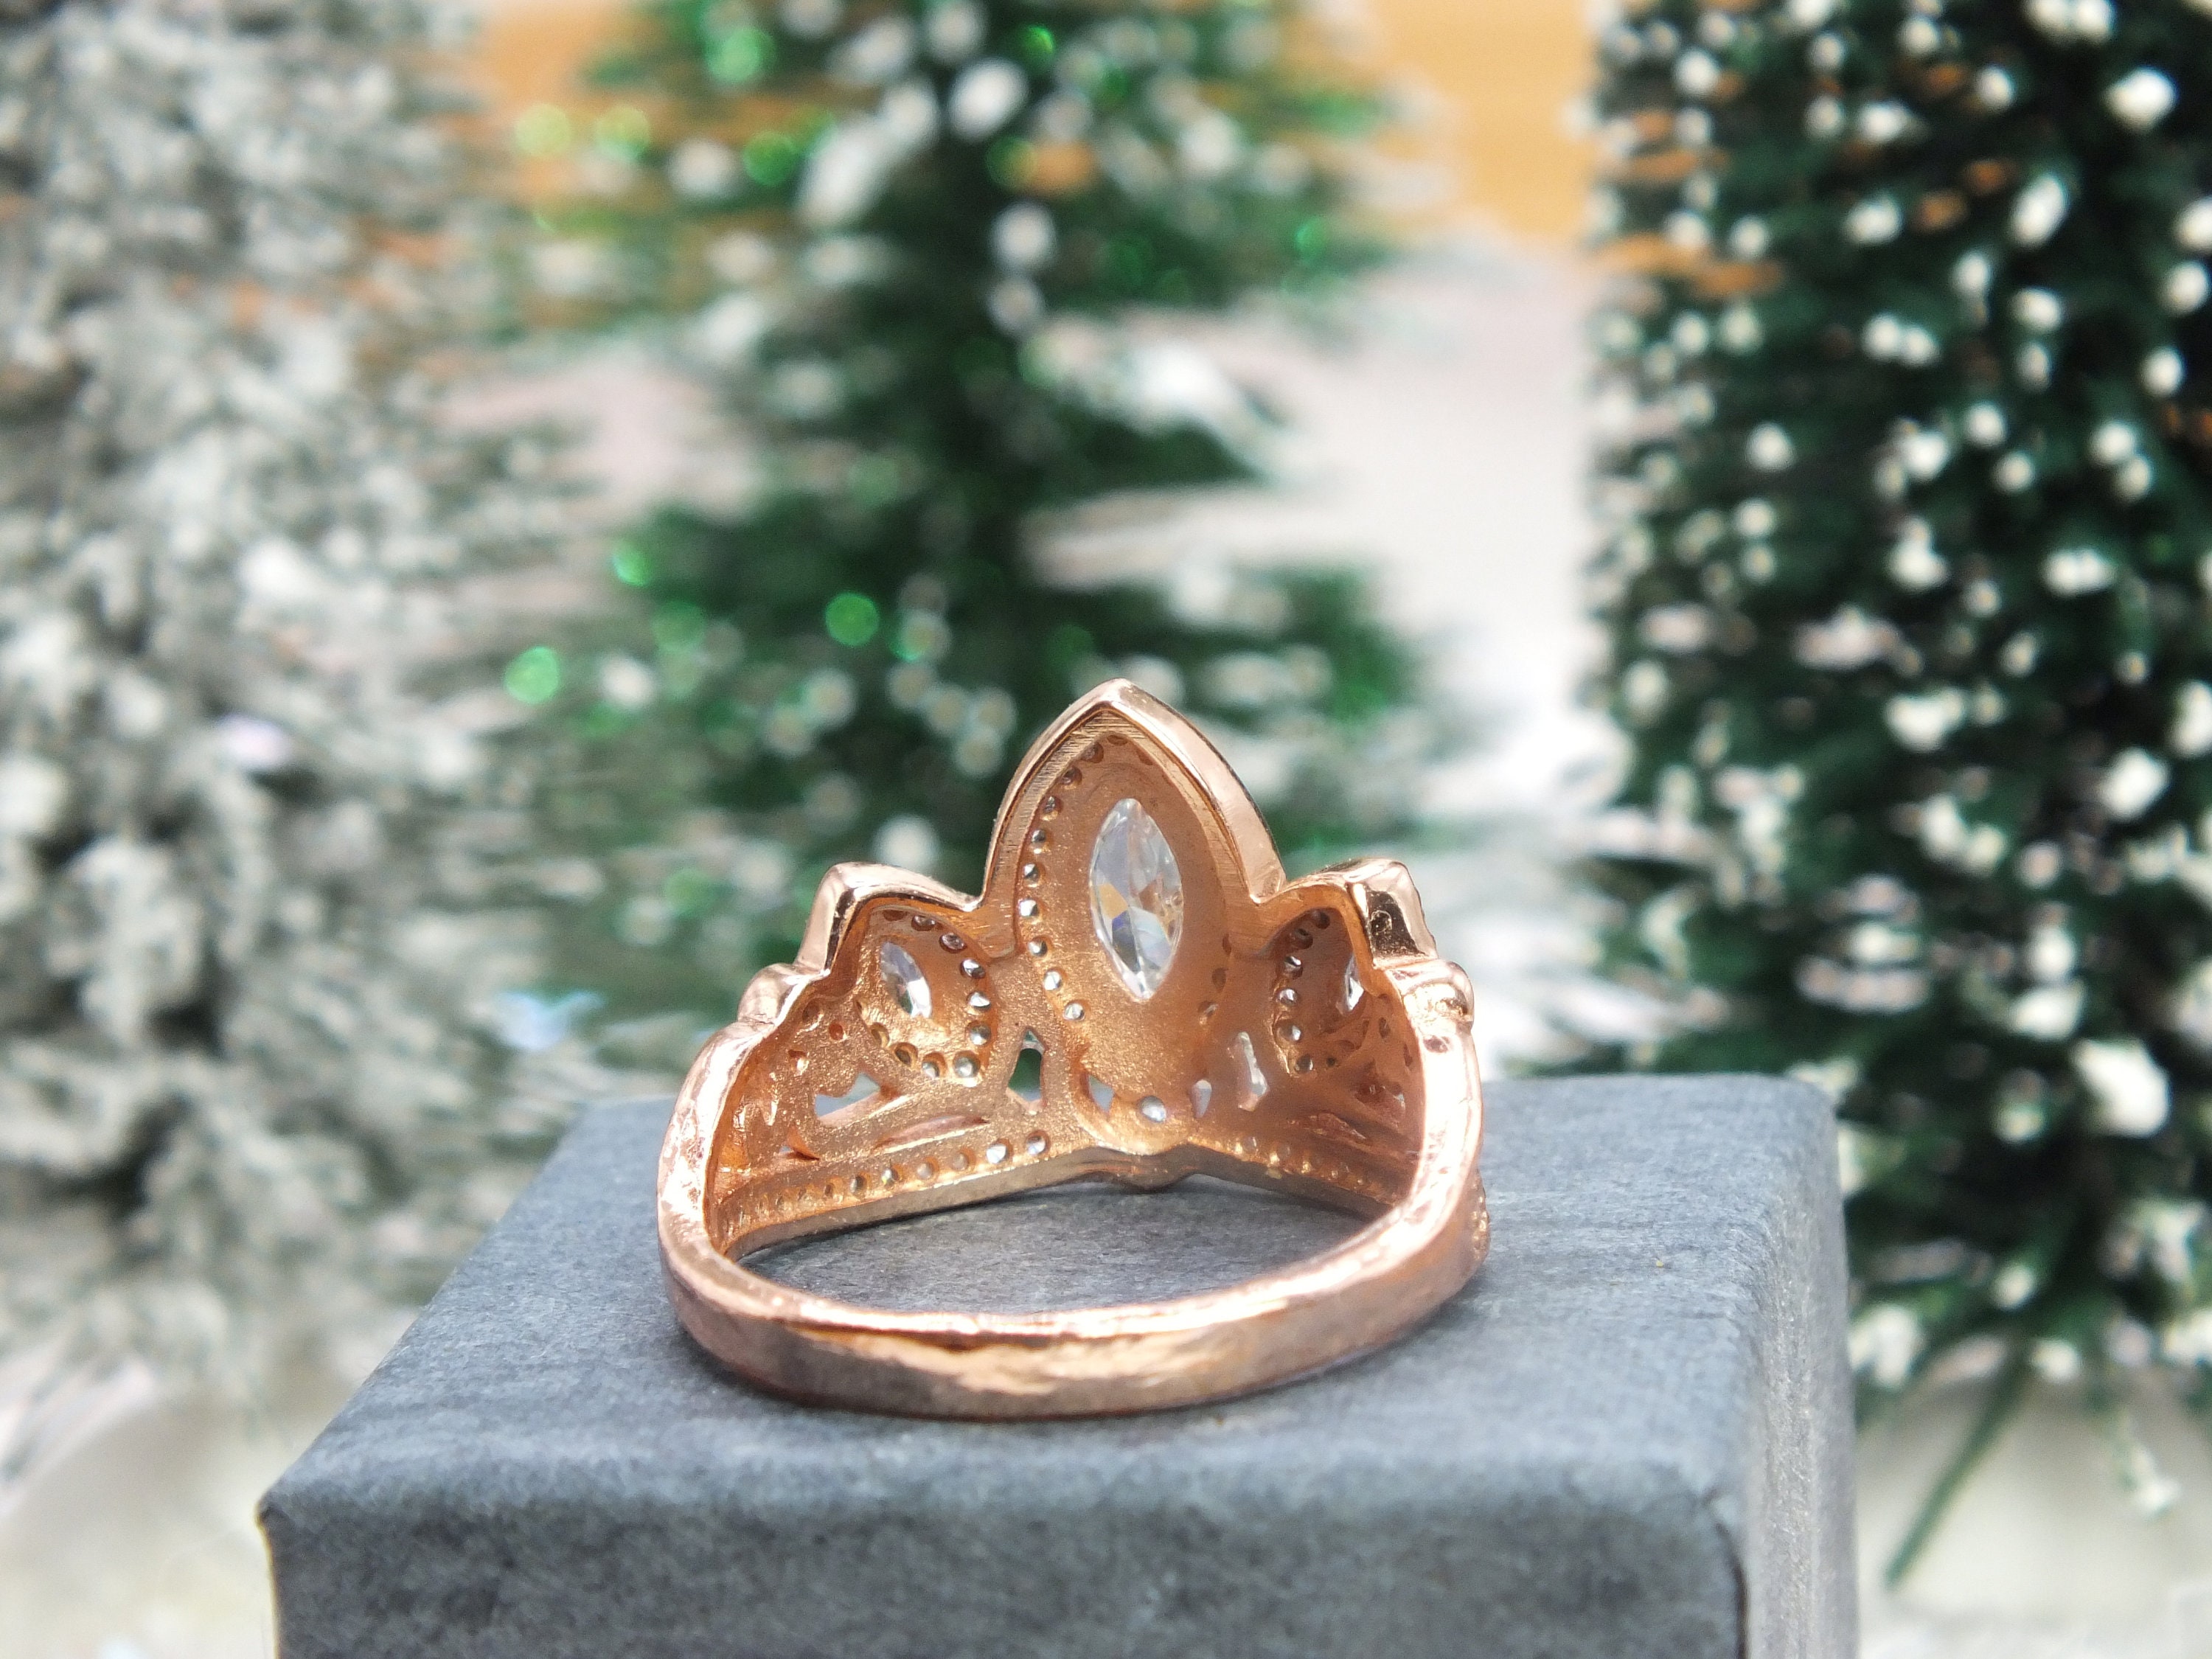 Amazon.com: Jewelili Enchanted Disney Fine Jewelry Sterling Silver and 10k  Rose Gold 1/5 Cttw Diamond Majestic Princess Tiara Ring Size 5: Clothing,  Shoes & Jewelry